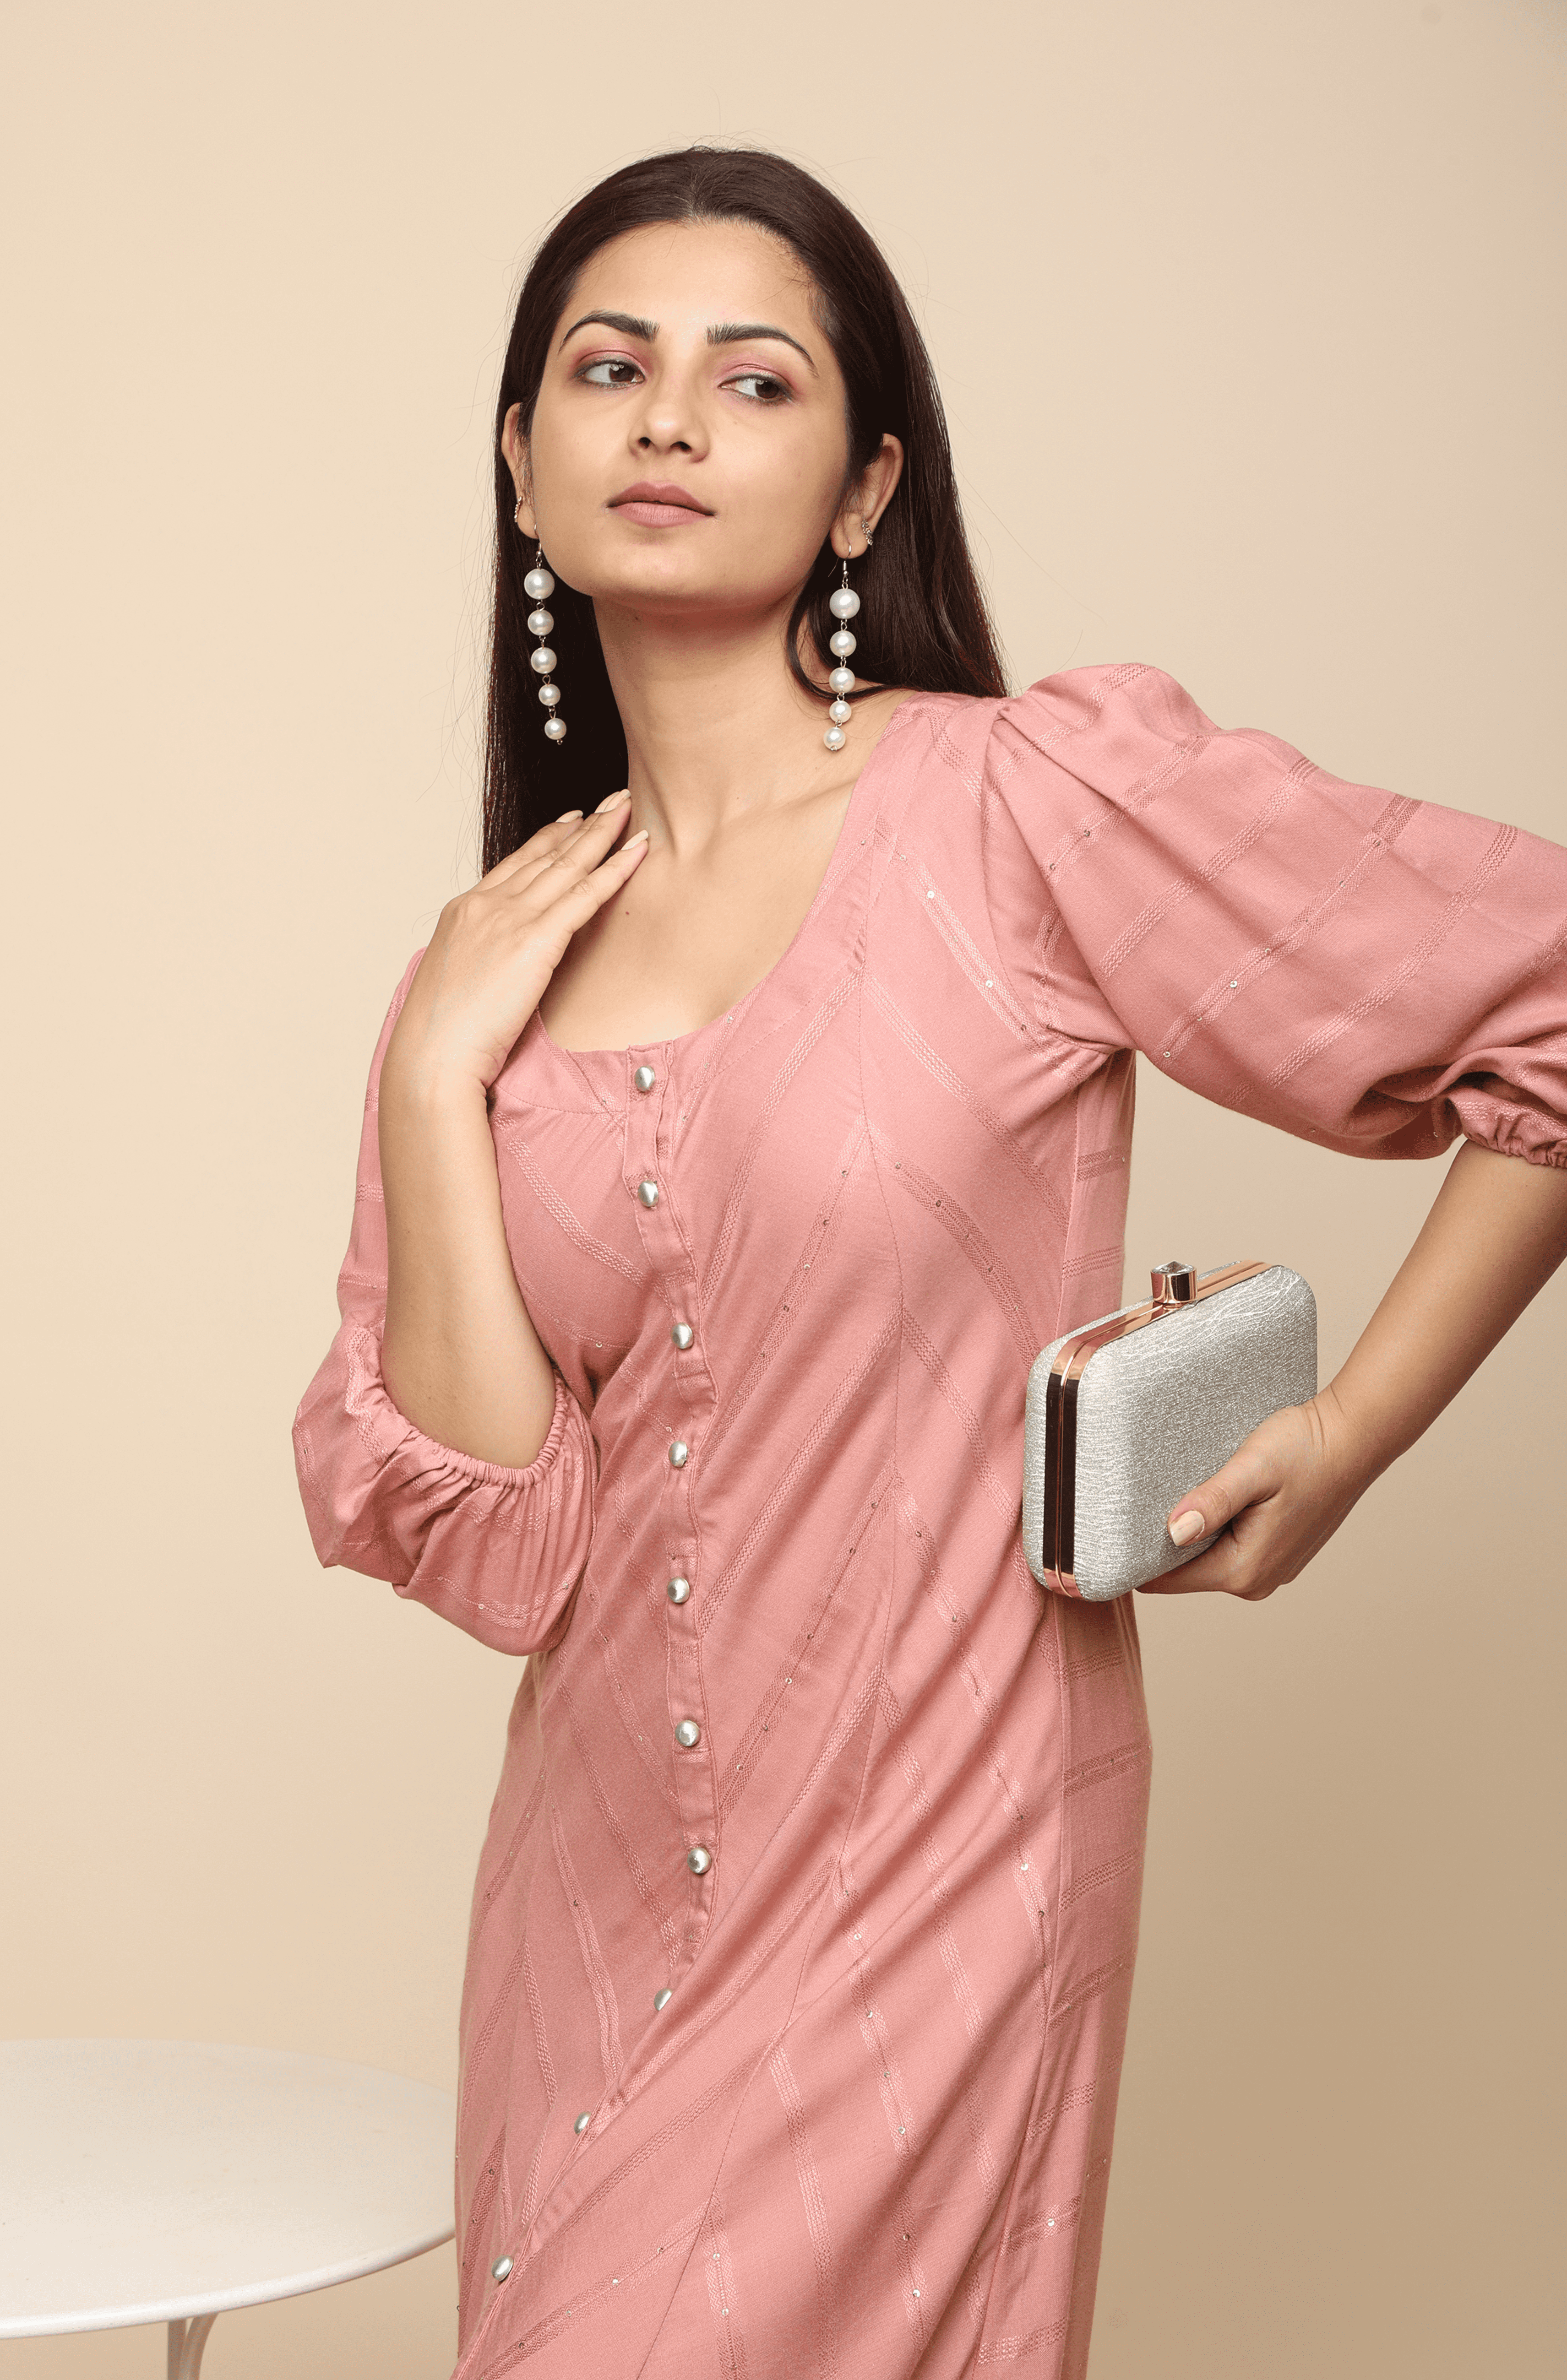 Collar Neck Kurti Designs: A Trend That's Here to Stay – The Loom Blog